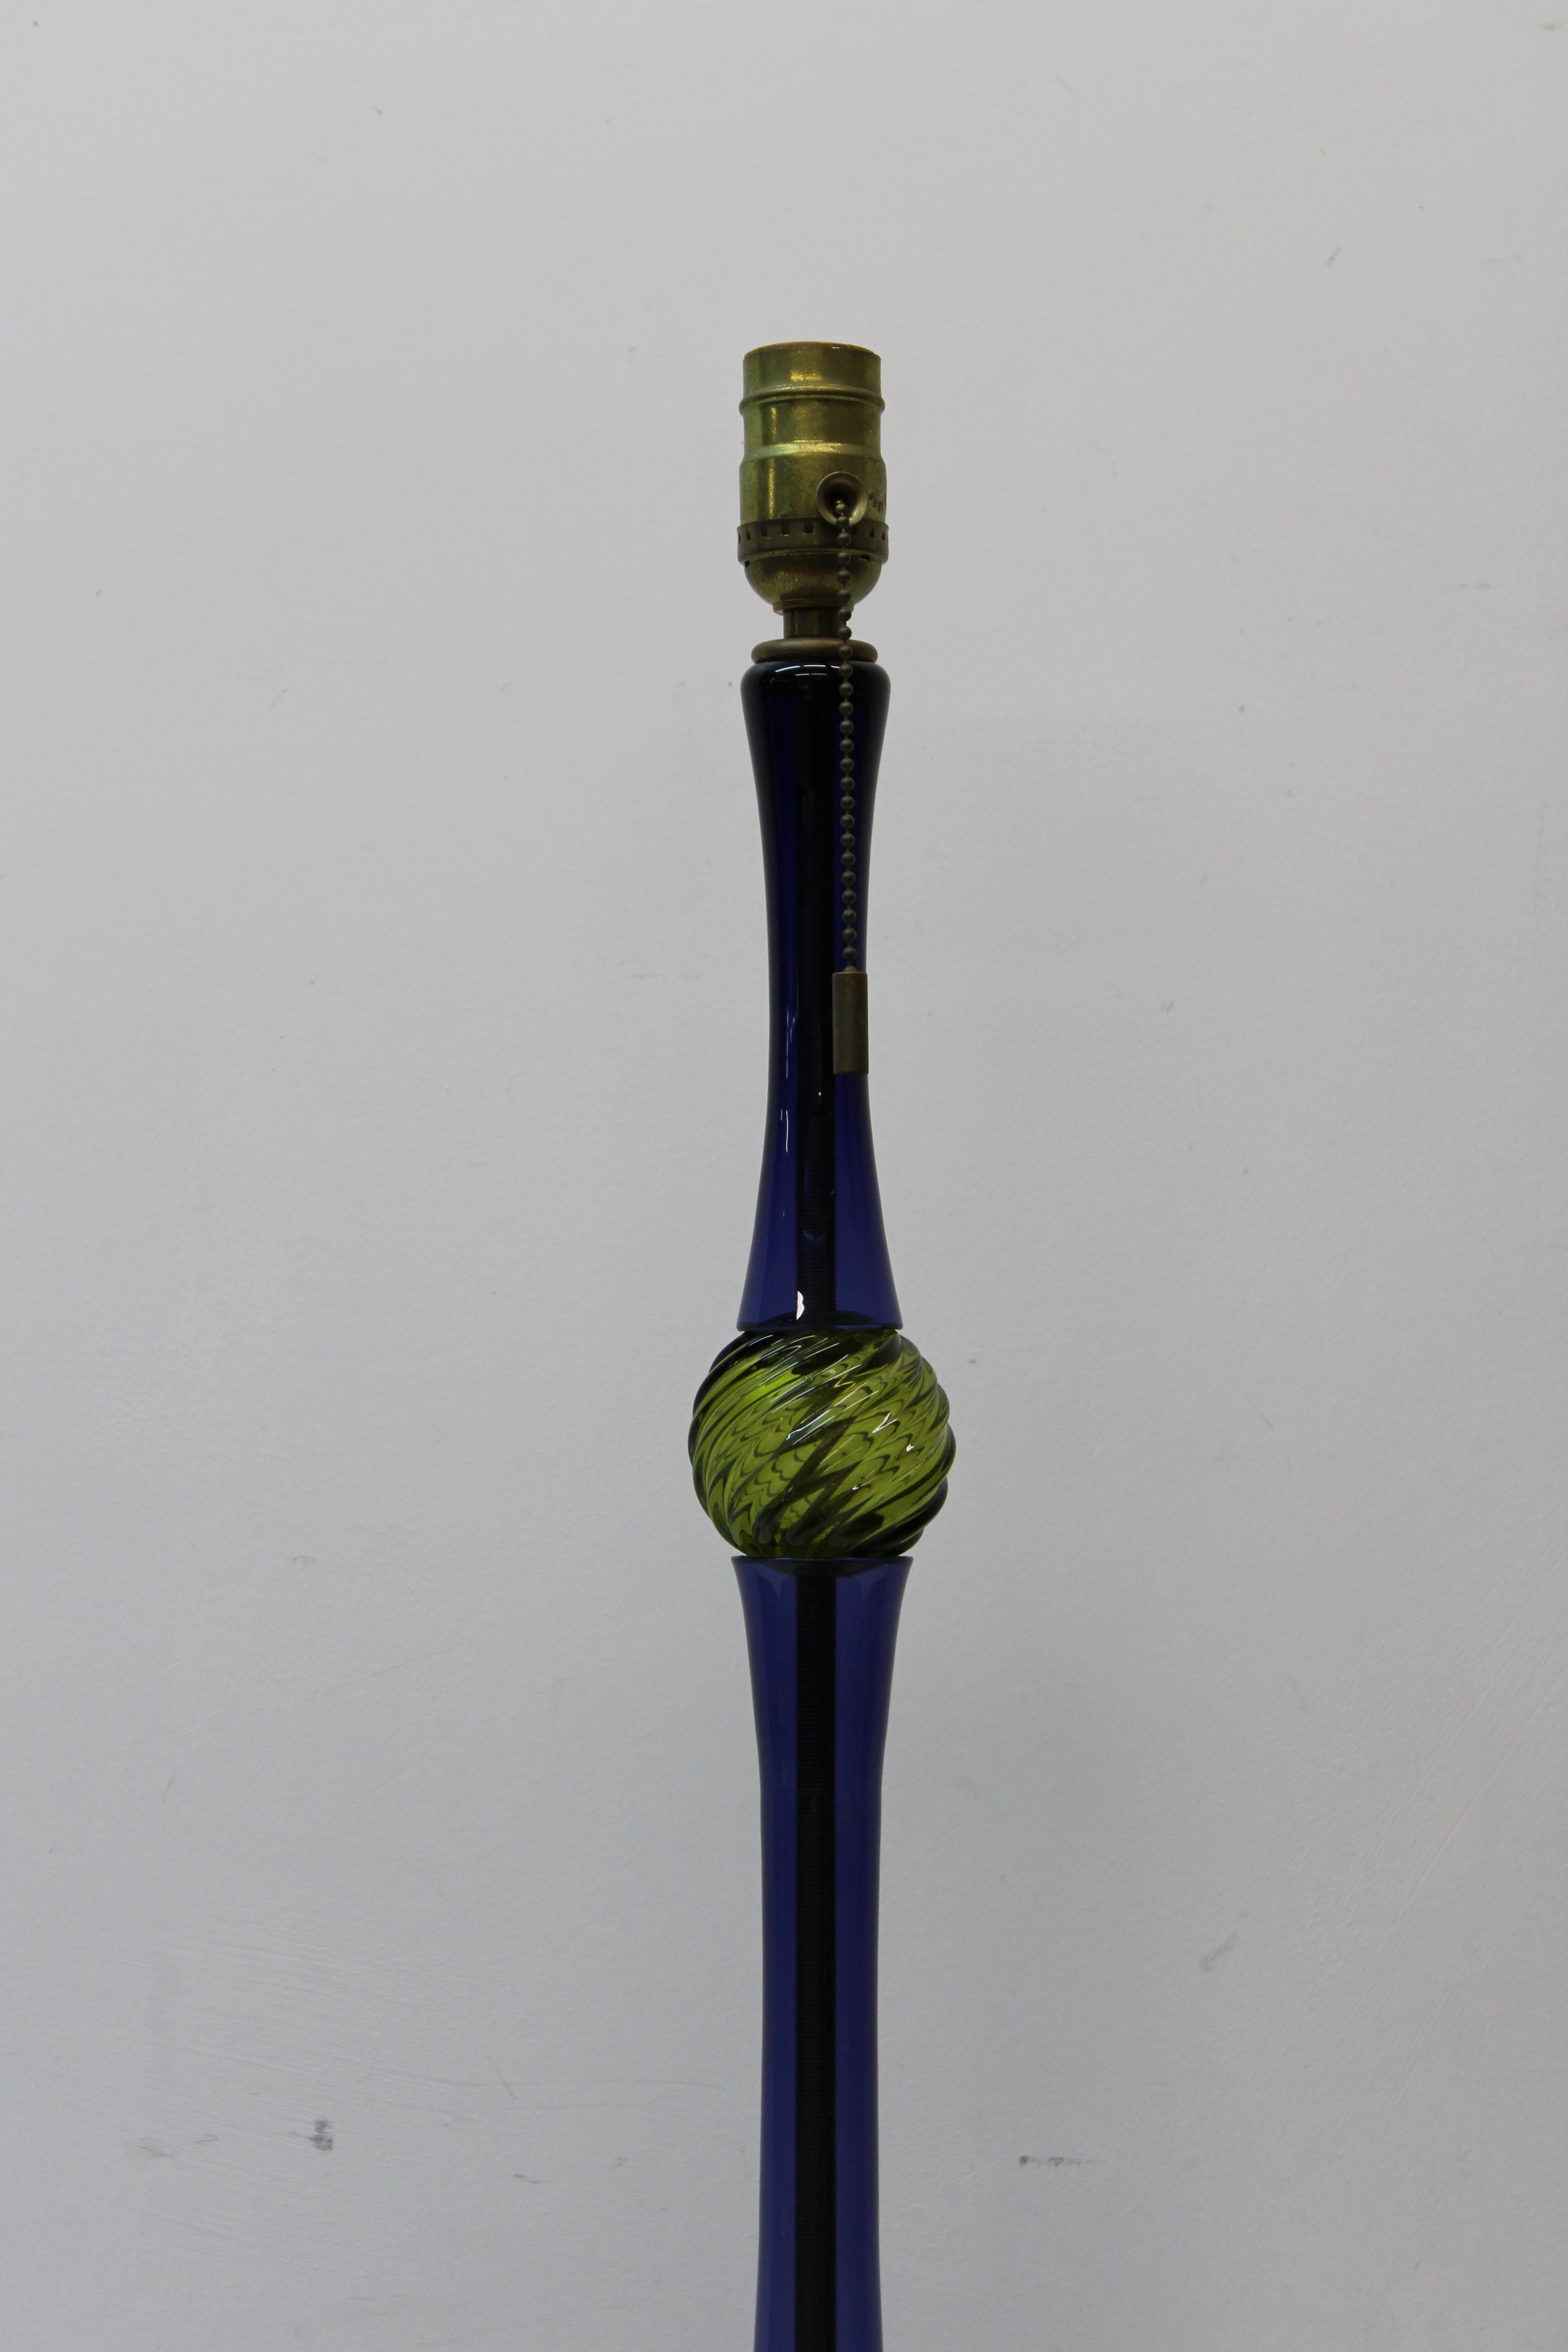 C. Late 20th Century

Murano Italian cobalt blue hand blown glass lamp w/ absynthe green sphere

Made by John Hutton for Donghia.